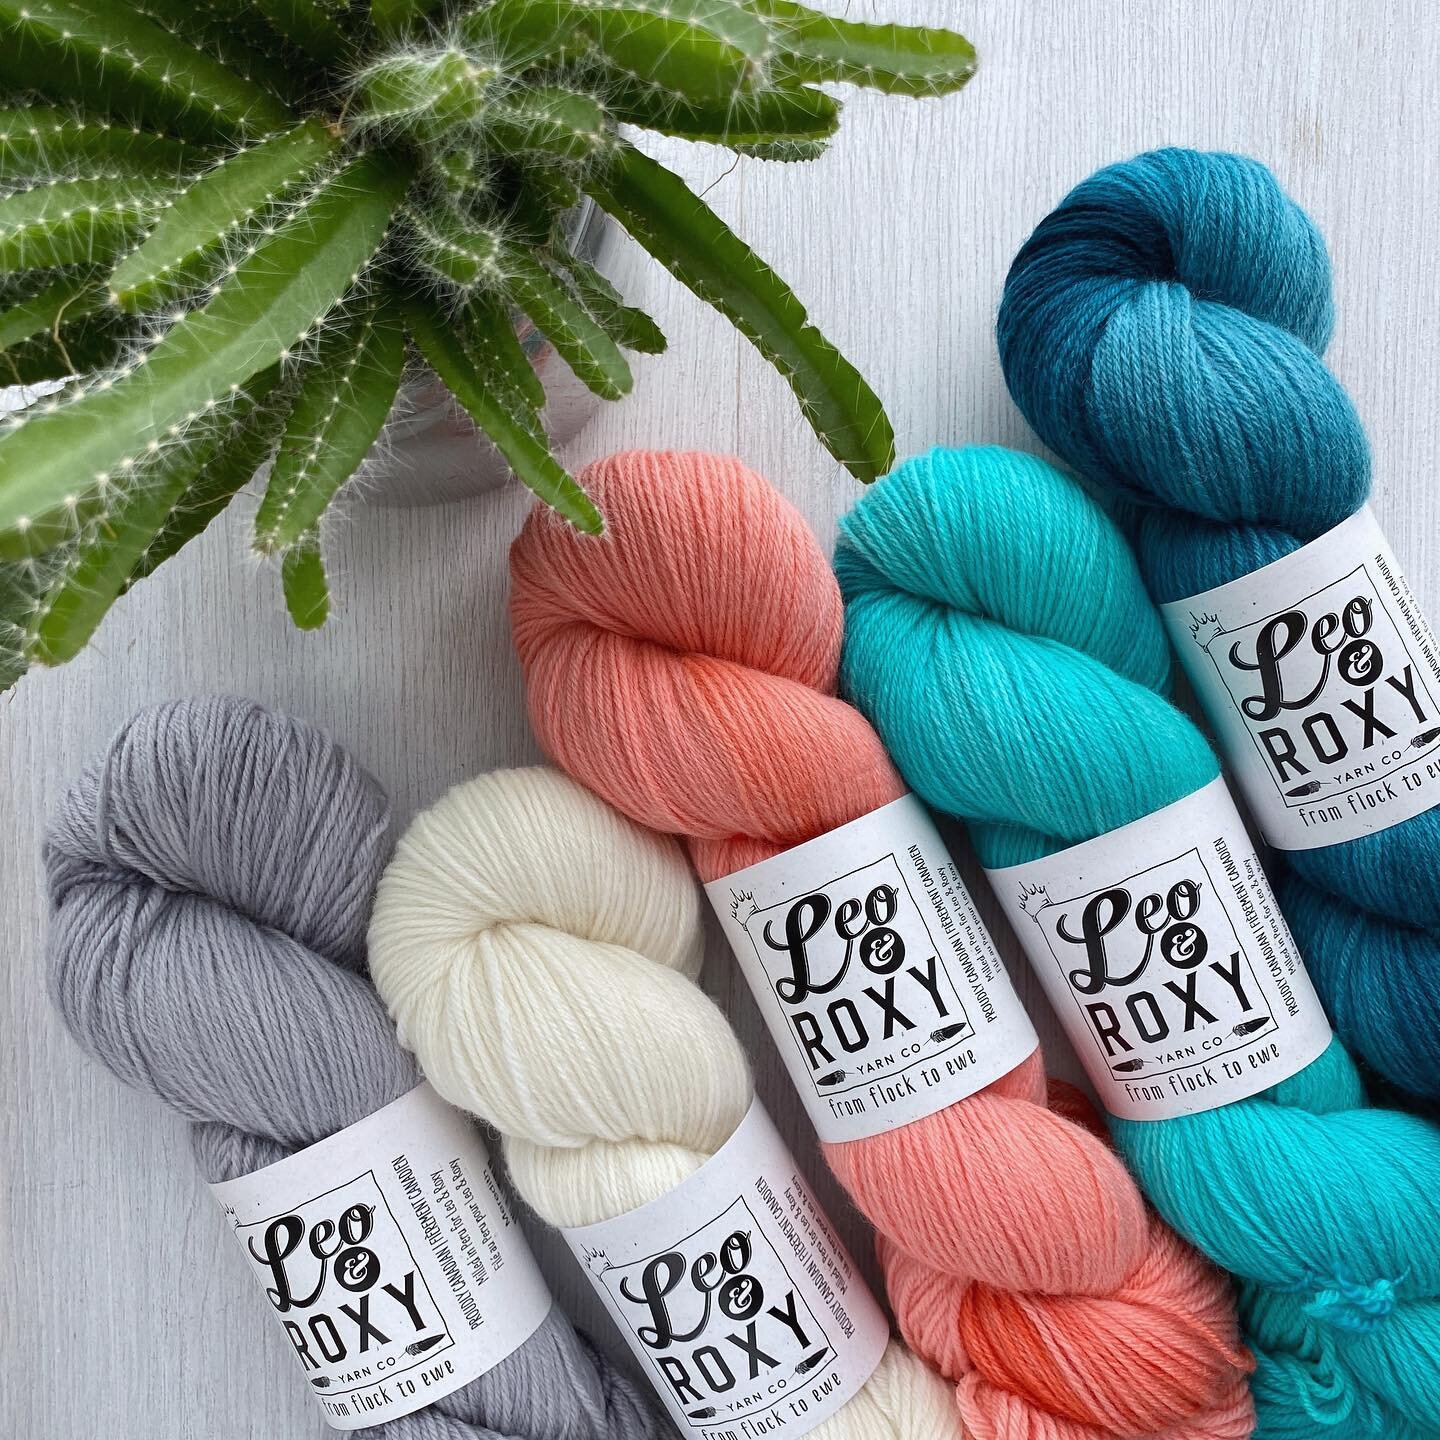 Just a reminder of the Birthday Shop Update tomorrow! New kits for the Travel Mode 2.0 Shawl will be available in Natural Sock. Swipe to see the sample. 

SHOP Update | Friday, April 14th!

#leoandroxyyarnco #colourfulyarn #brightyarn #indiedyer #han